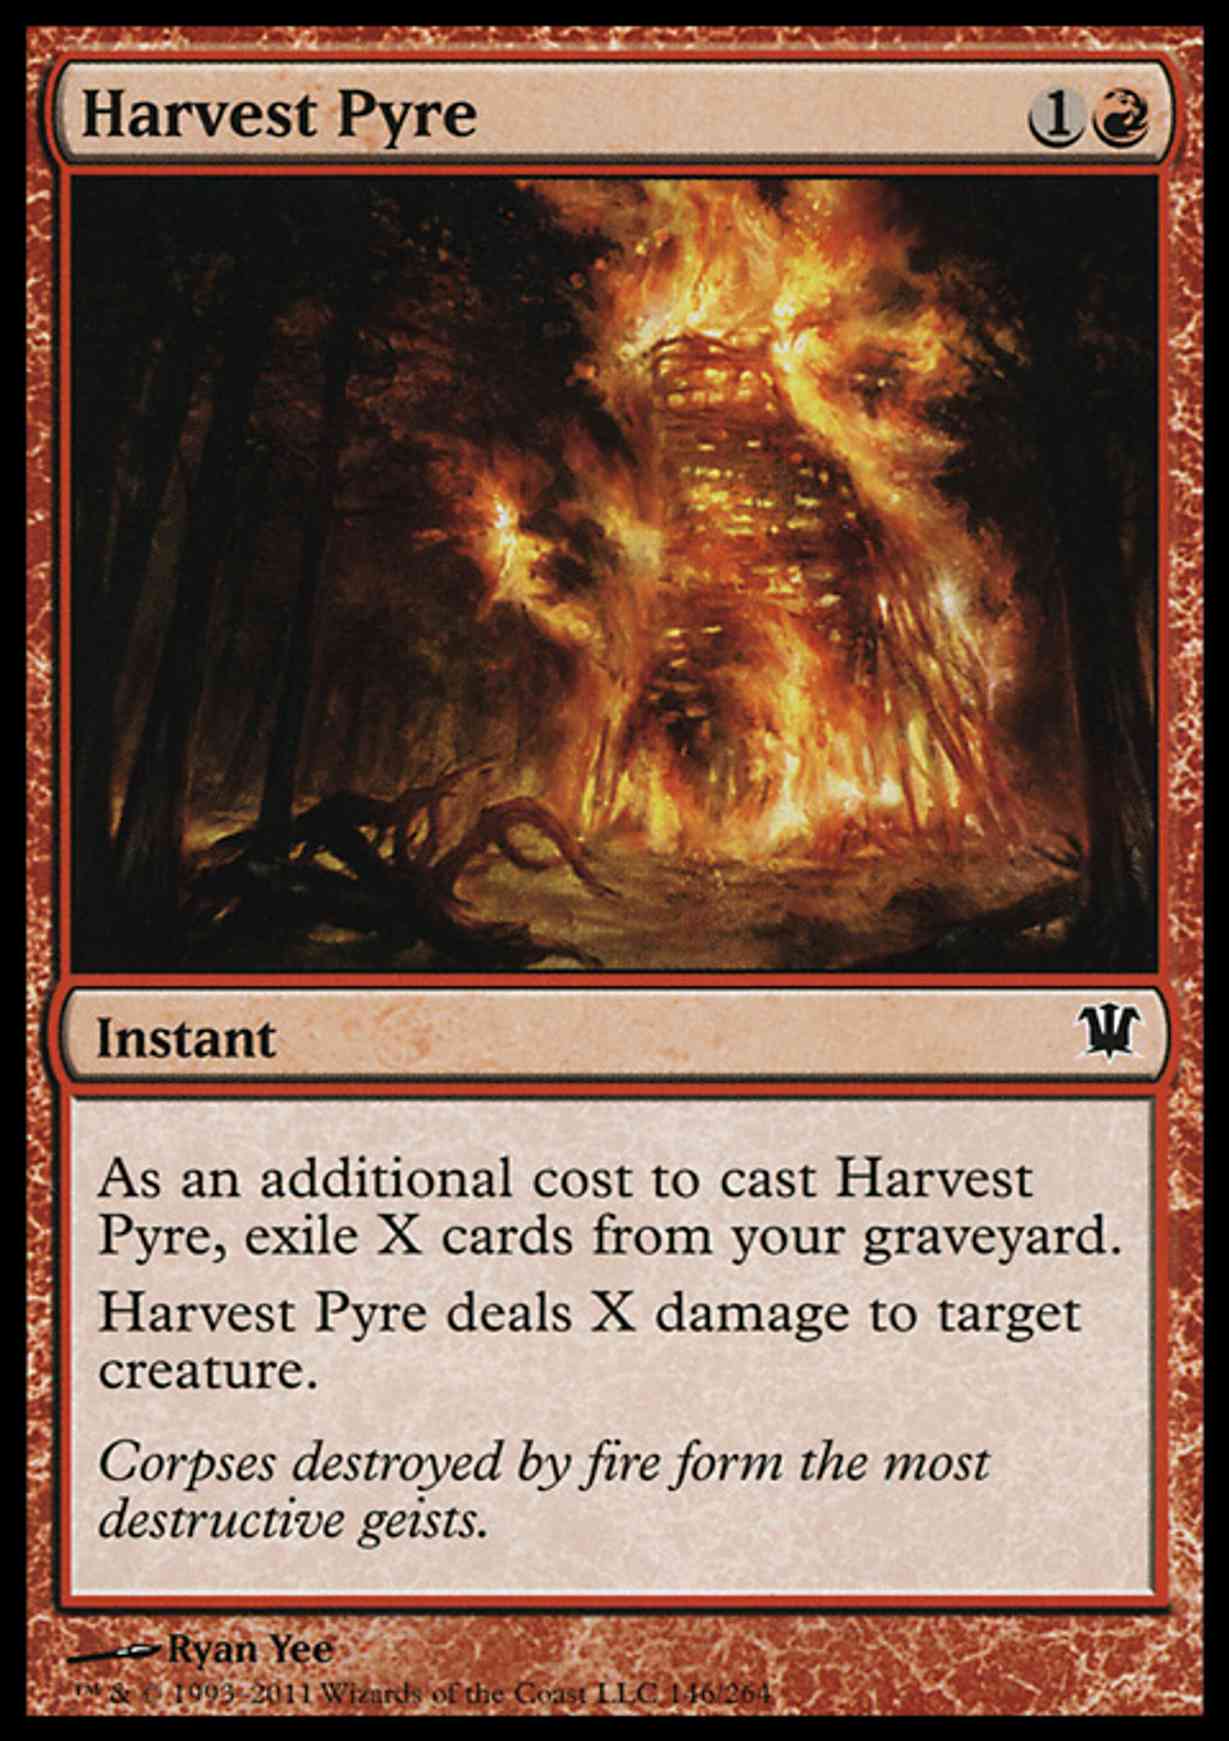 Harvest Pyre magic card front